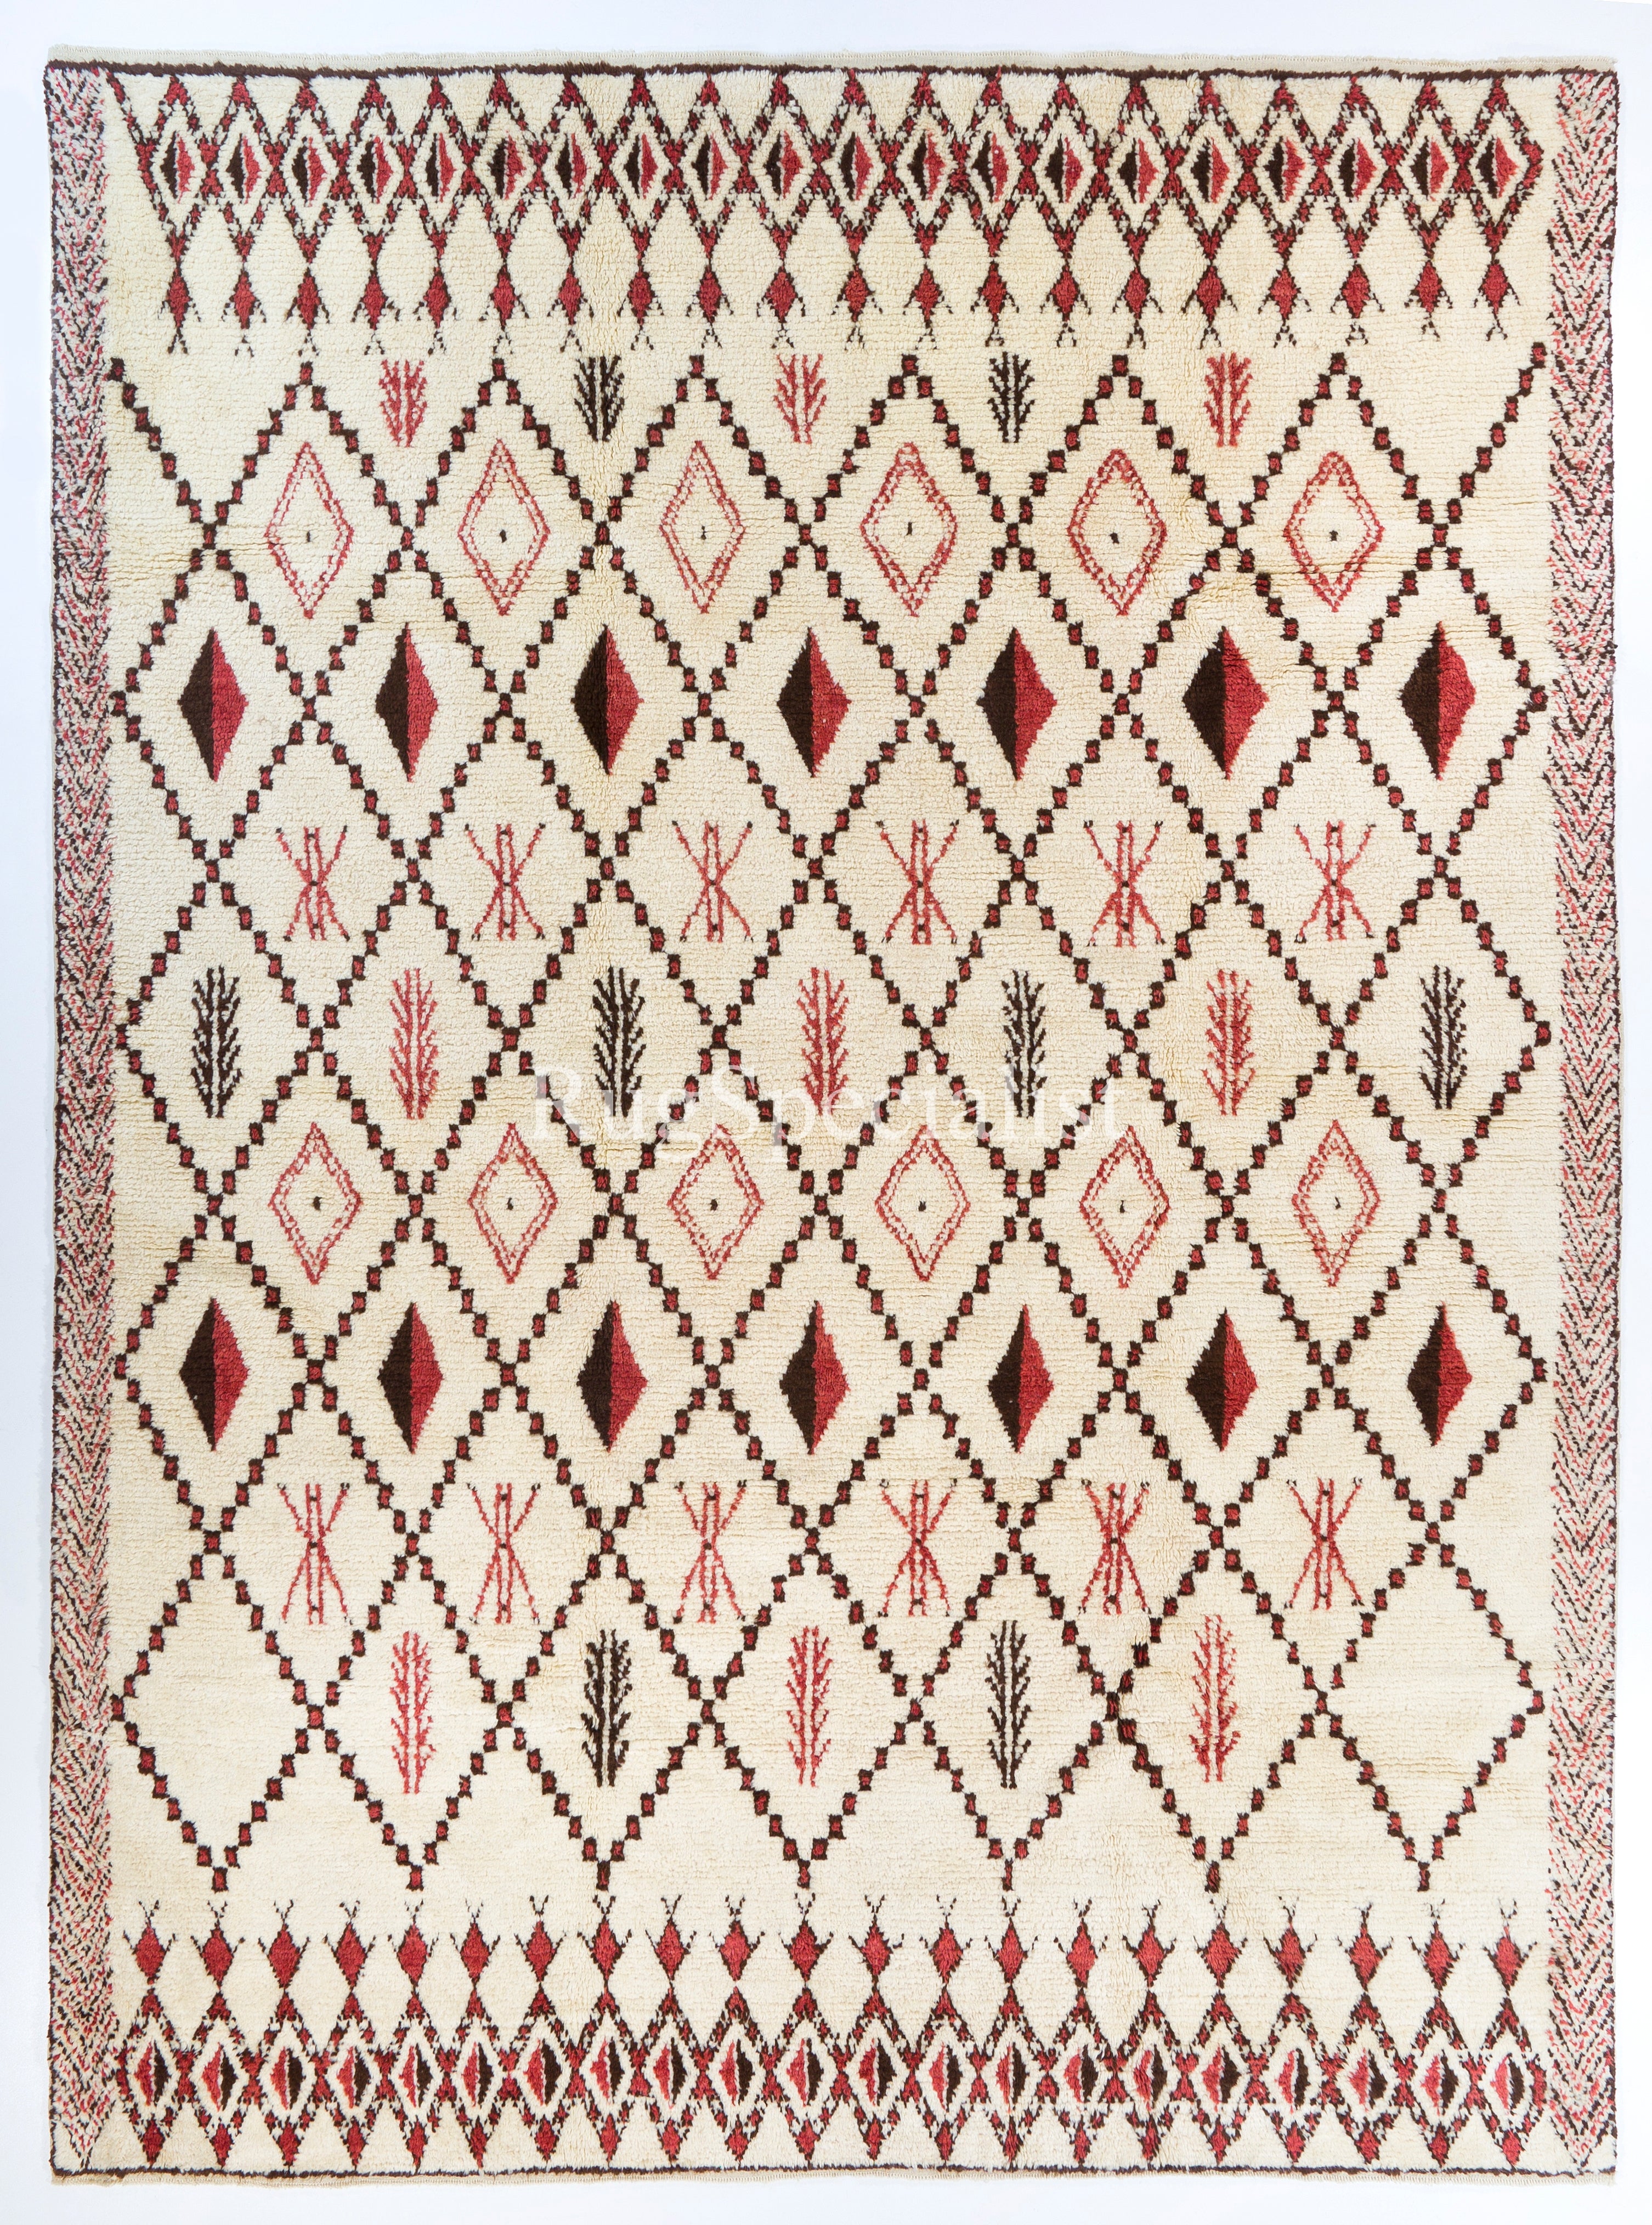 10.5x14.4 Ft Modern Moroccan Tulu Wool Rug in Beige, Red & Brown. Made-to-order For Sale